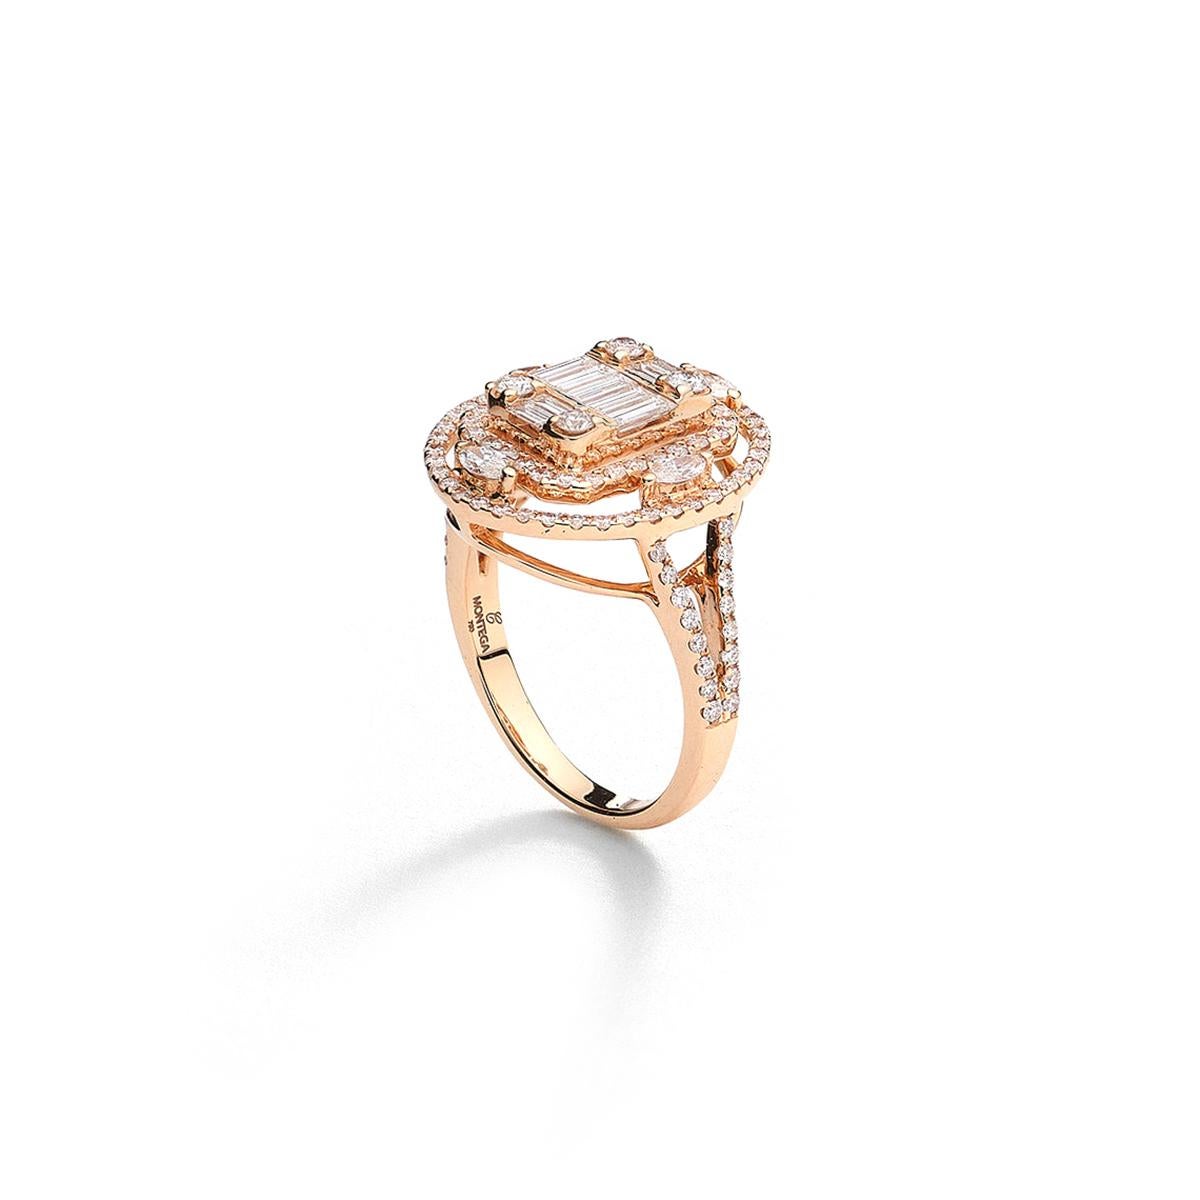 Ring in 18kt pink gold set with 13 baguette and marquise cut diamonds 0.61 cts and 104 diamonds 0.67 cts Size 53

Total weight: 6.02 grams